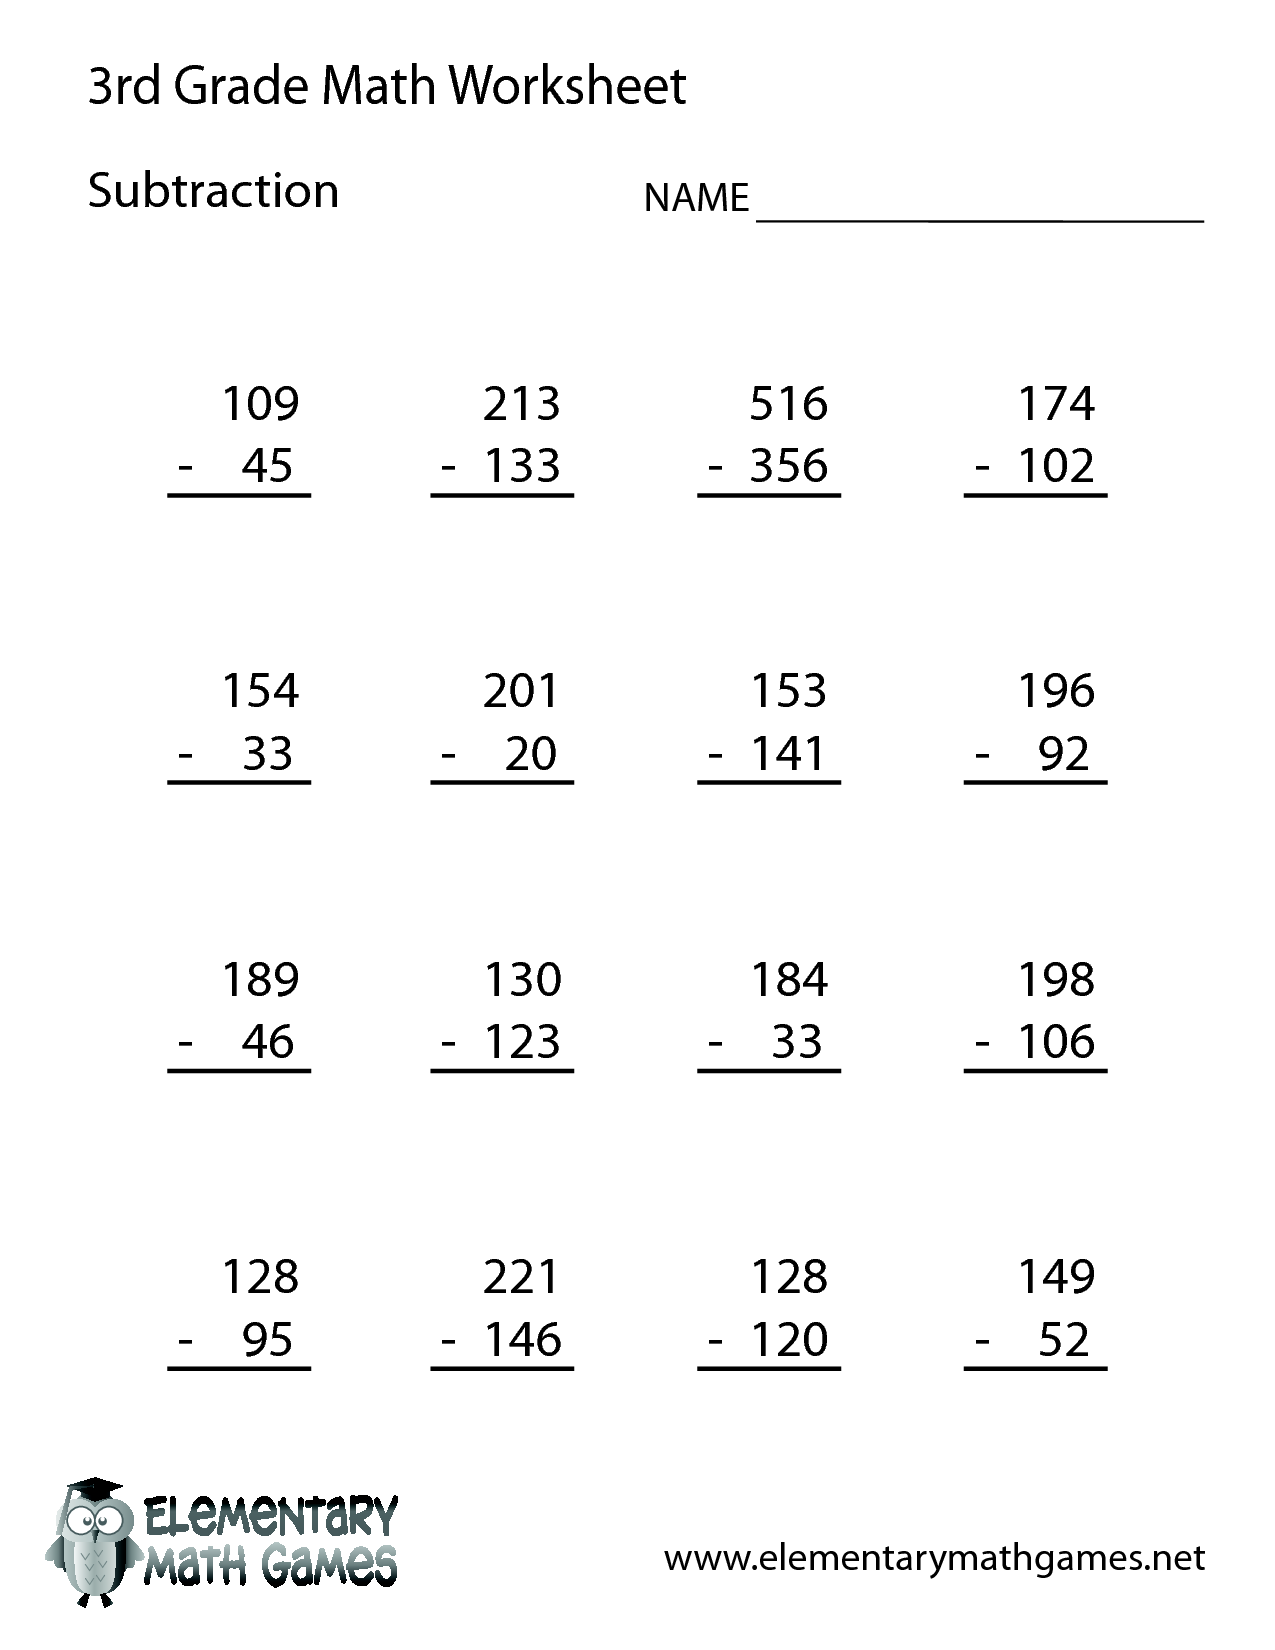 Third Grade 3rd Grade Math Worksheets Addition And Subtraction